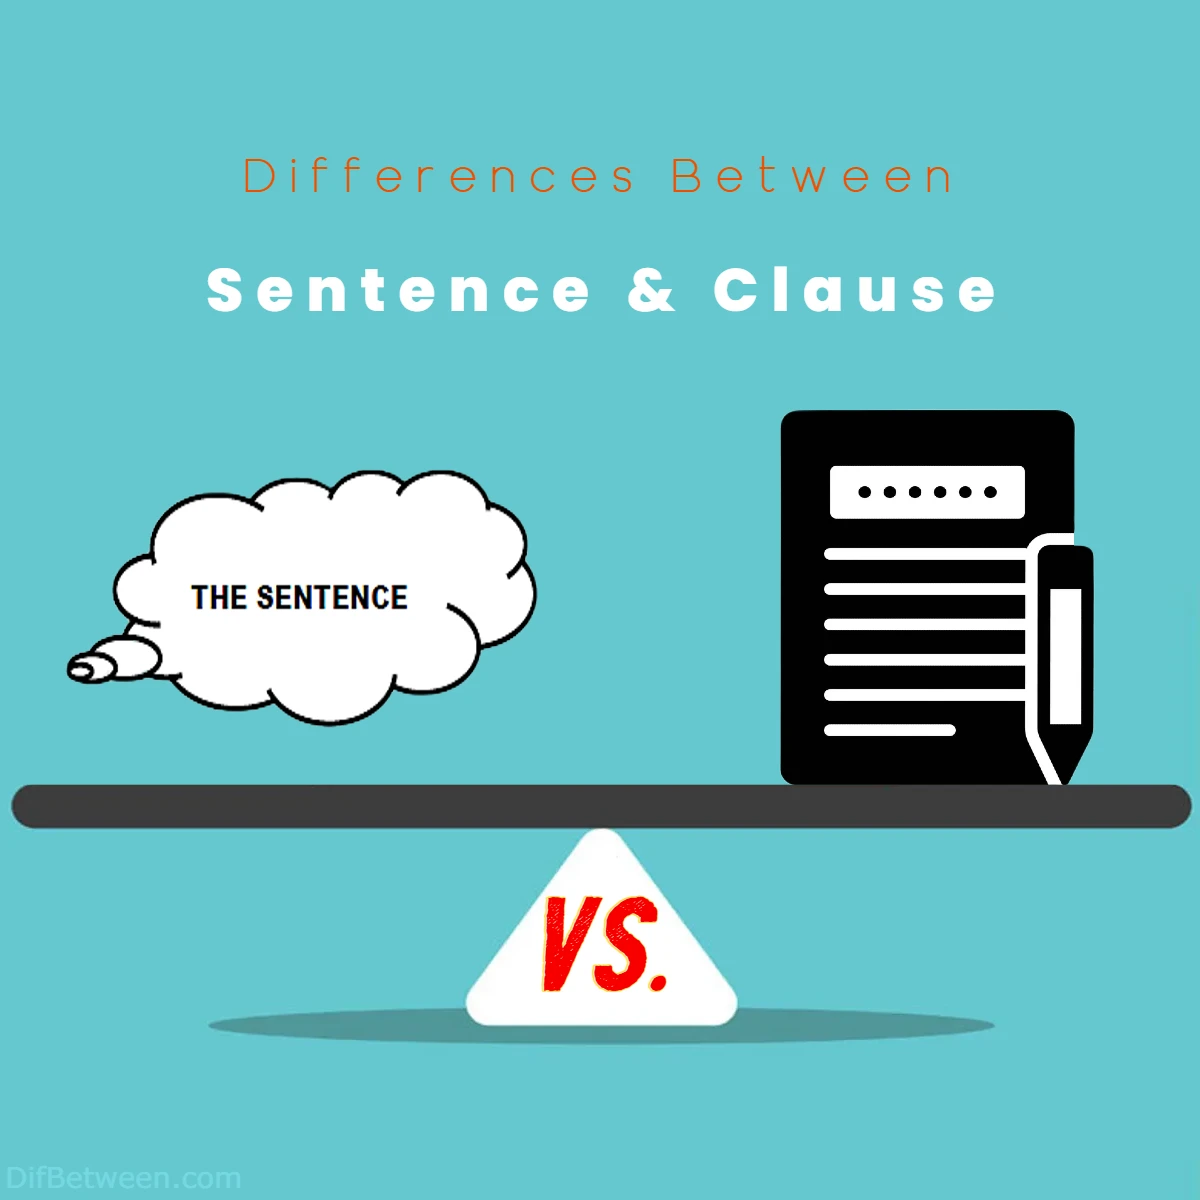 Differences Between Sentence vs Clause